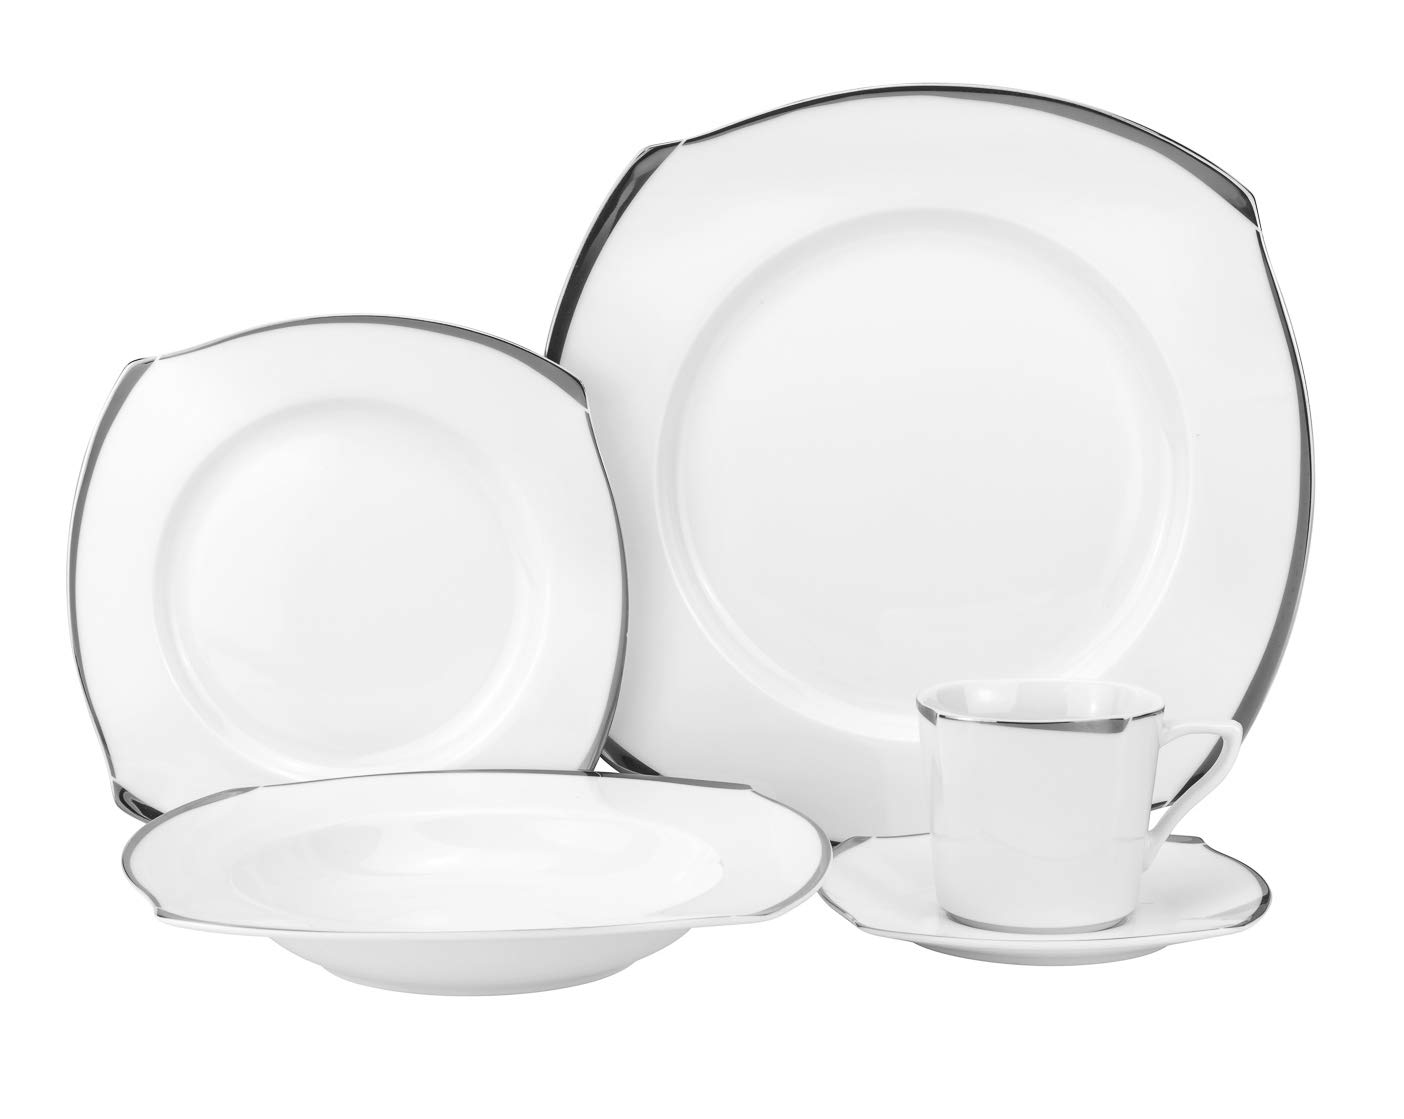 Euro Porcelain 5-Piece Dinner Set Service for 1, 24K Gold-plated Luxury Bone China Tableware - image 1 of 1